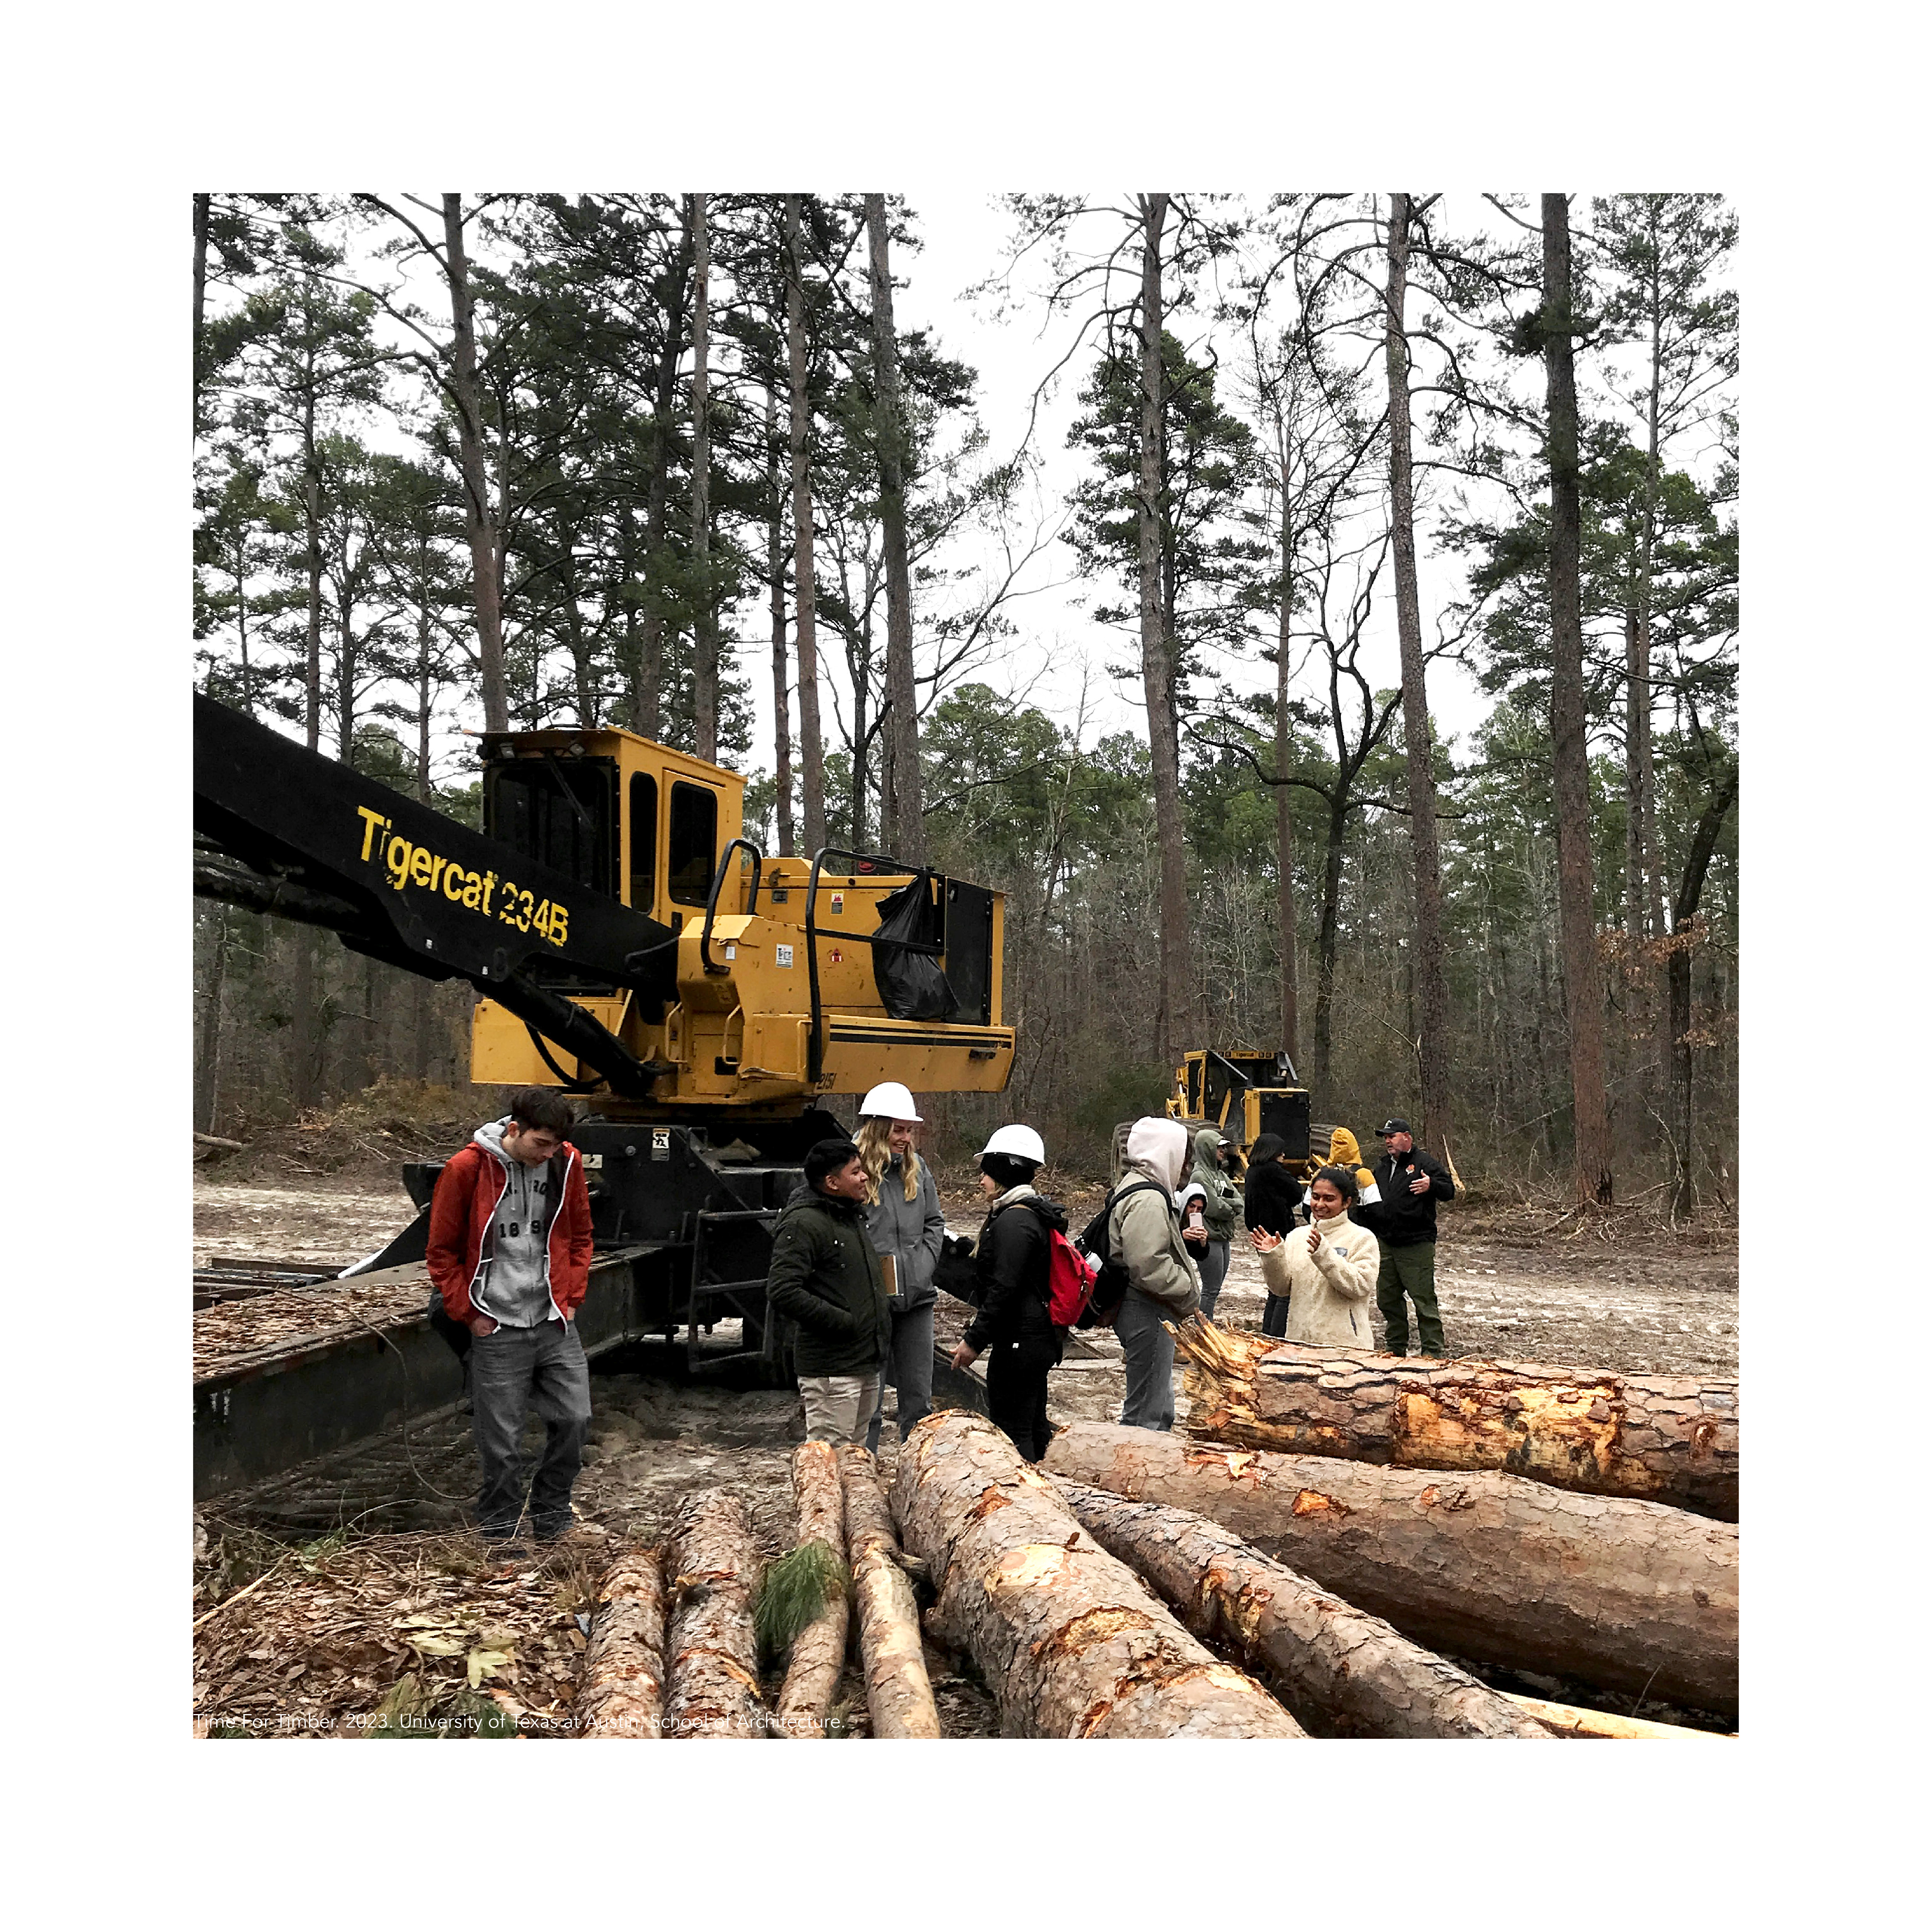 Students in jackets and hard hats gather around a piece of heavy machinery, with large logs piled up in the foreground and tall trees in the background